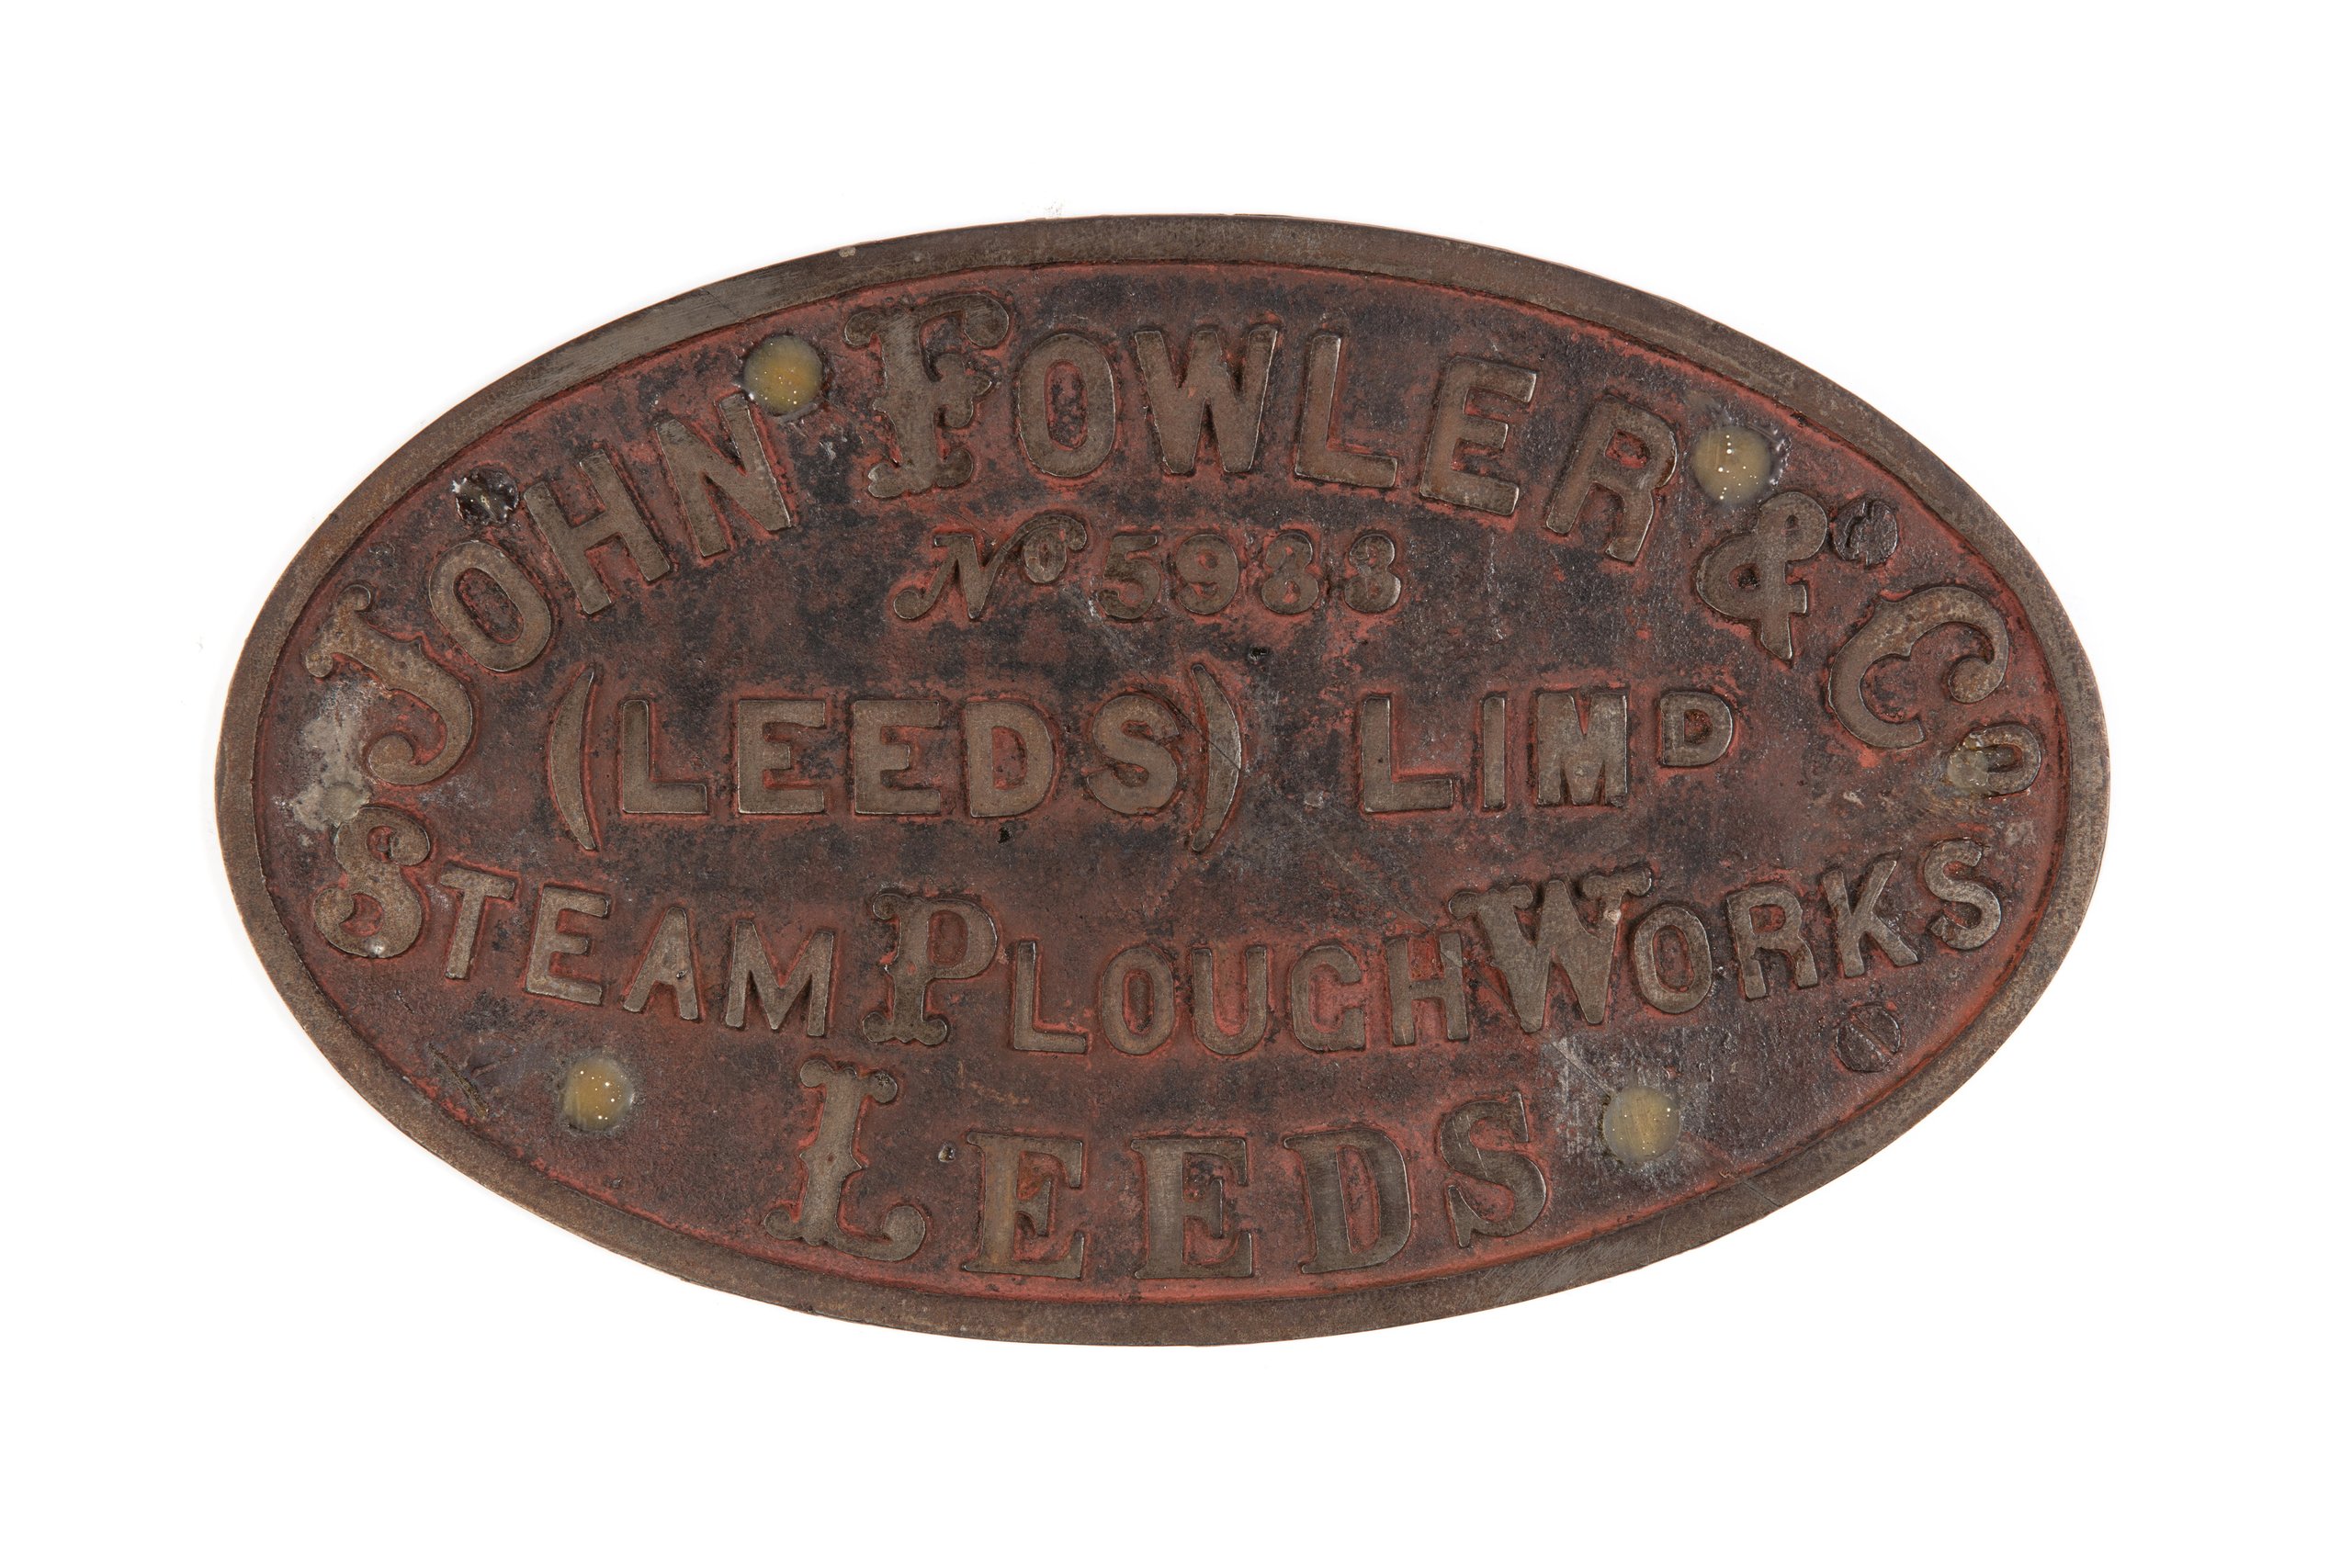 Makers plaque for steam plowing engine